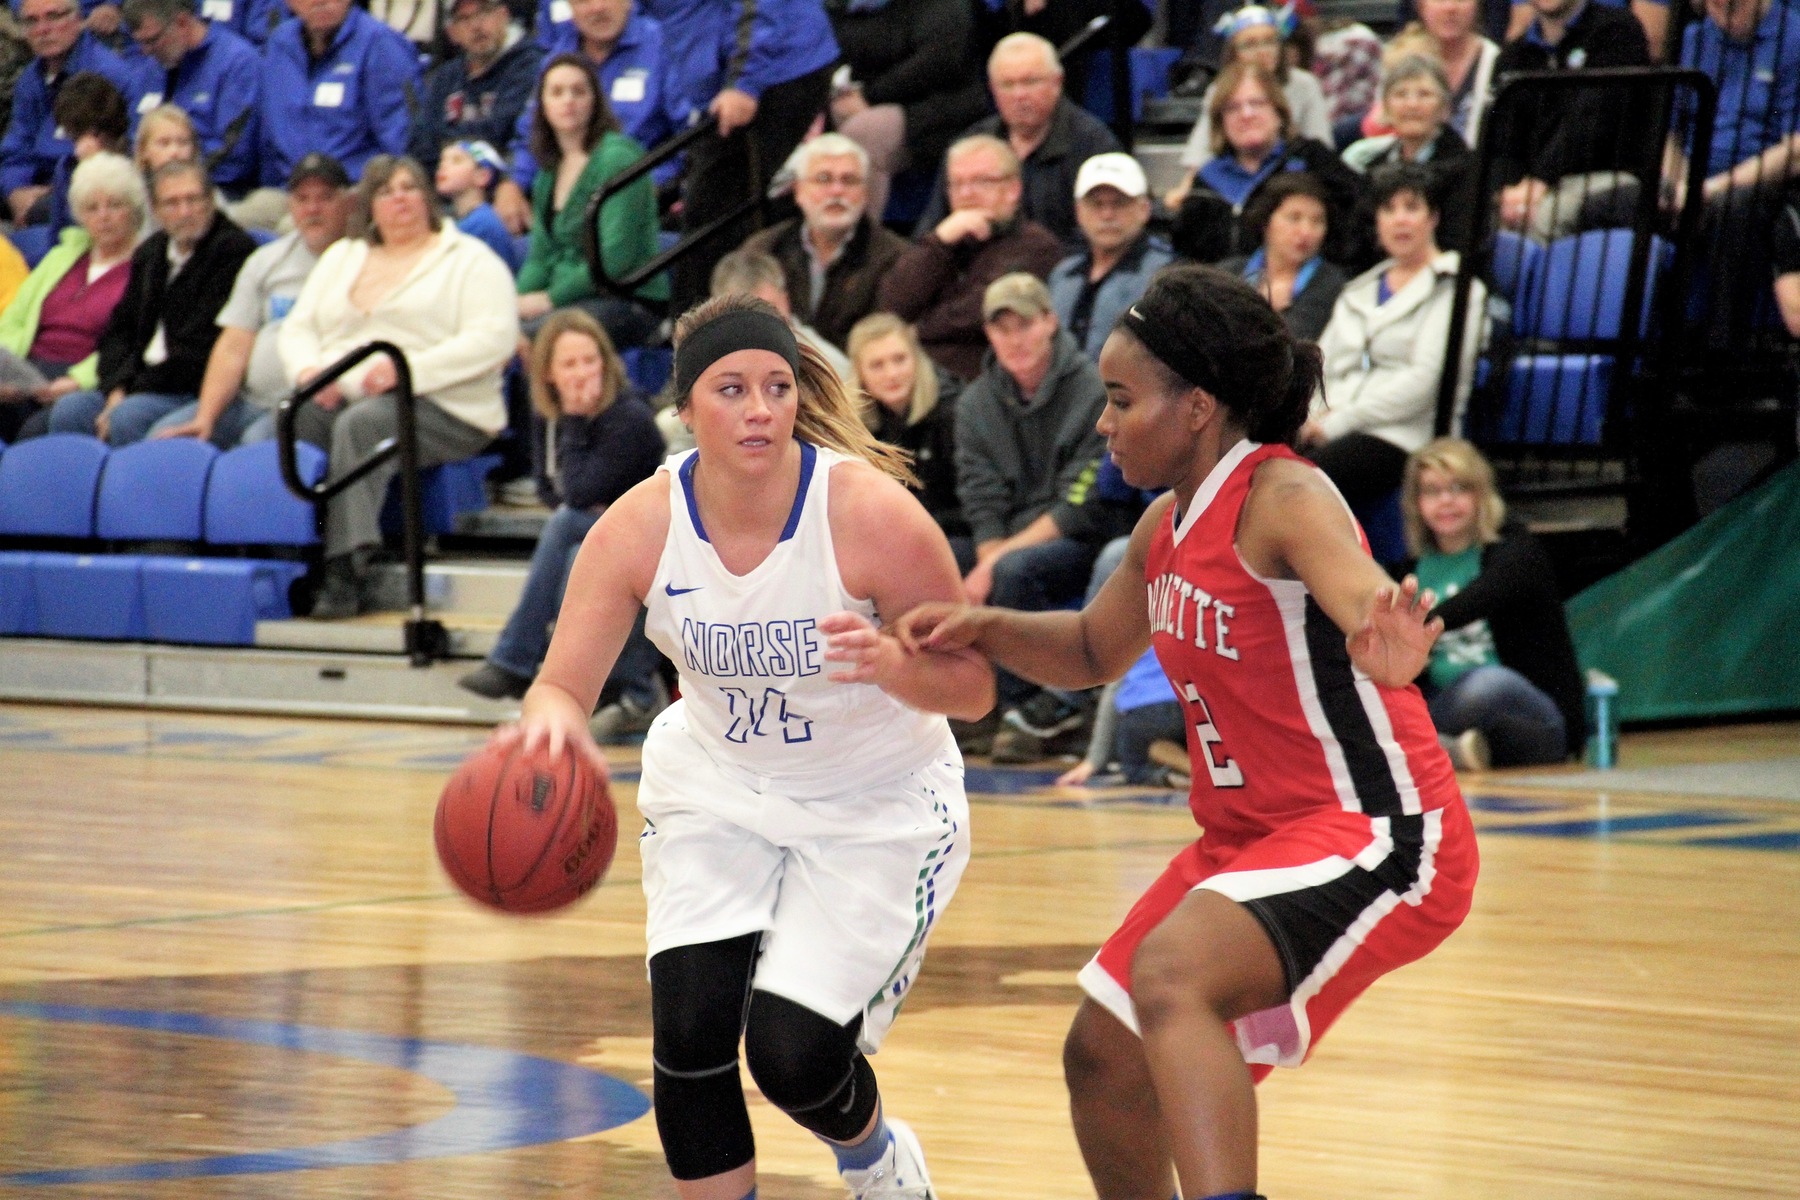 Caitlin Hewitt dribbling to her right with a defender closely guarding